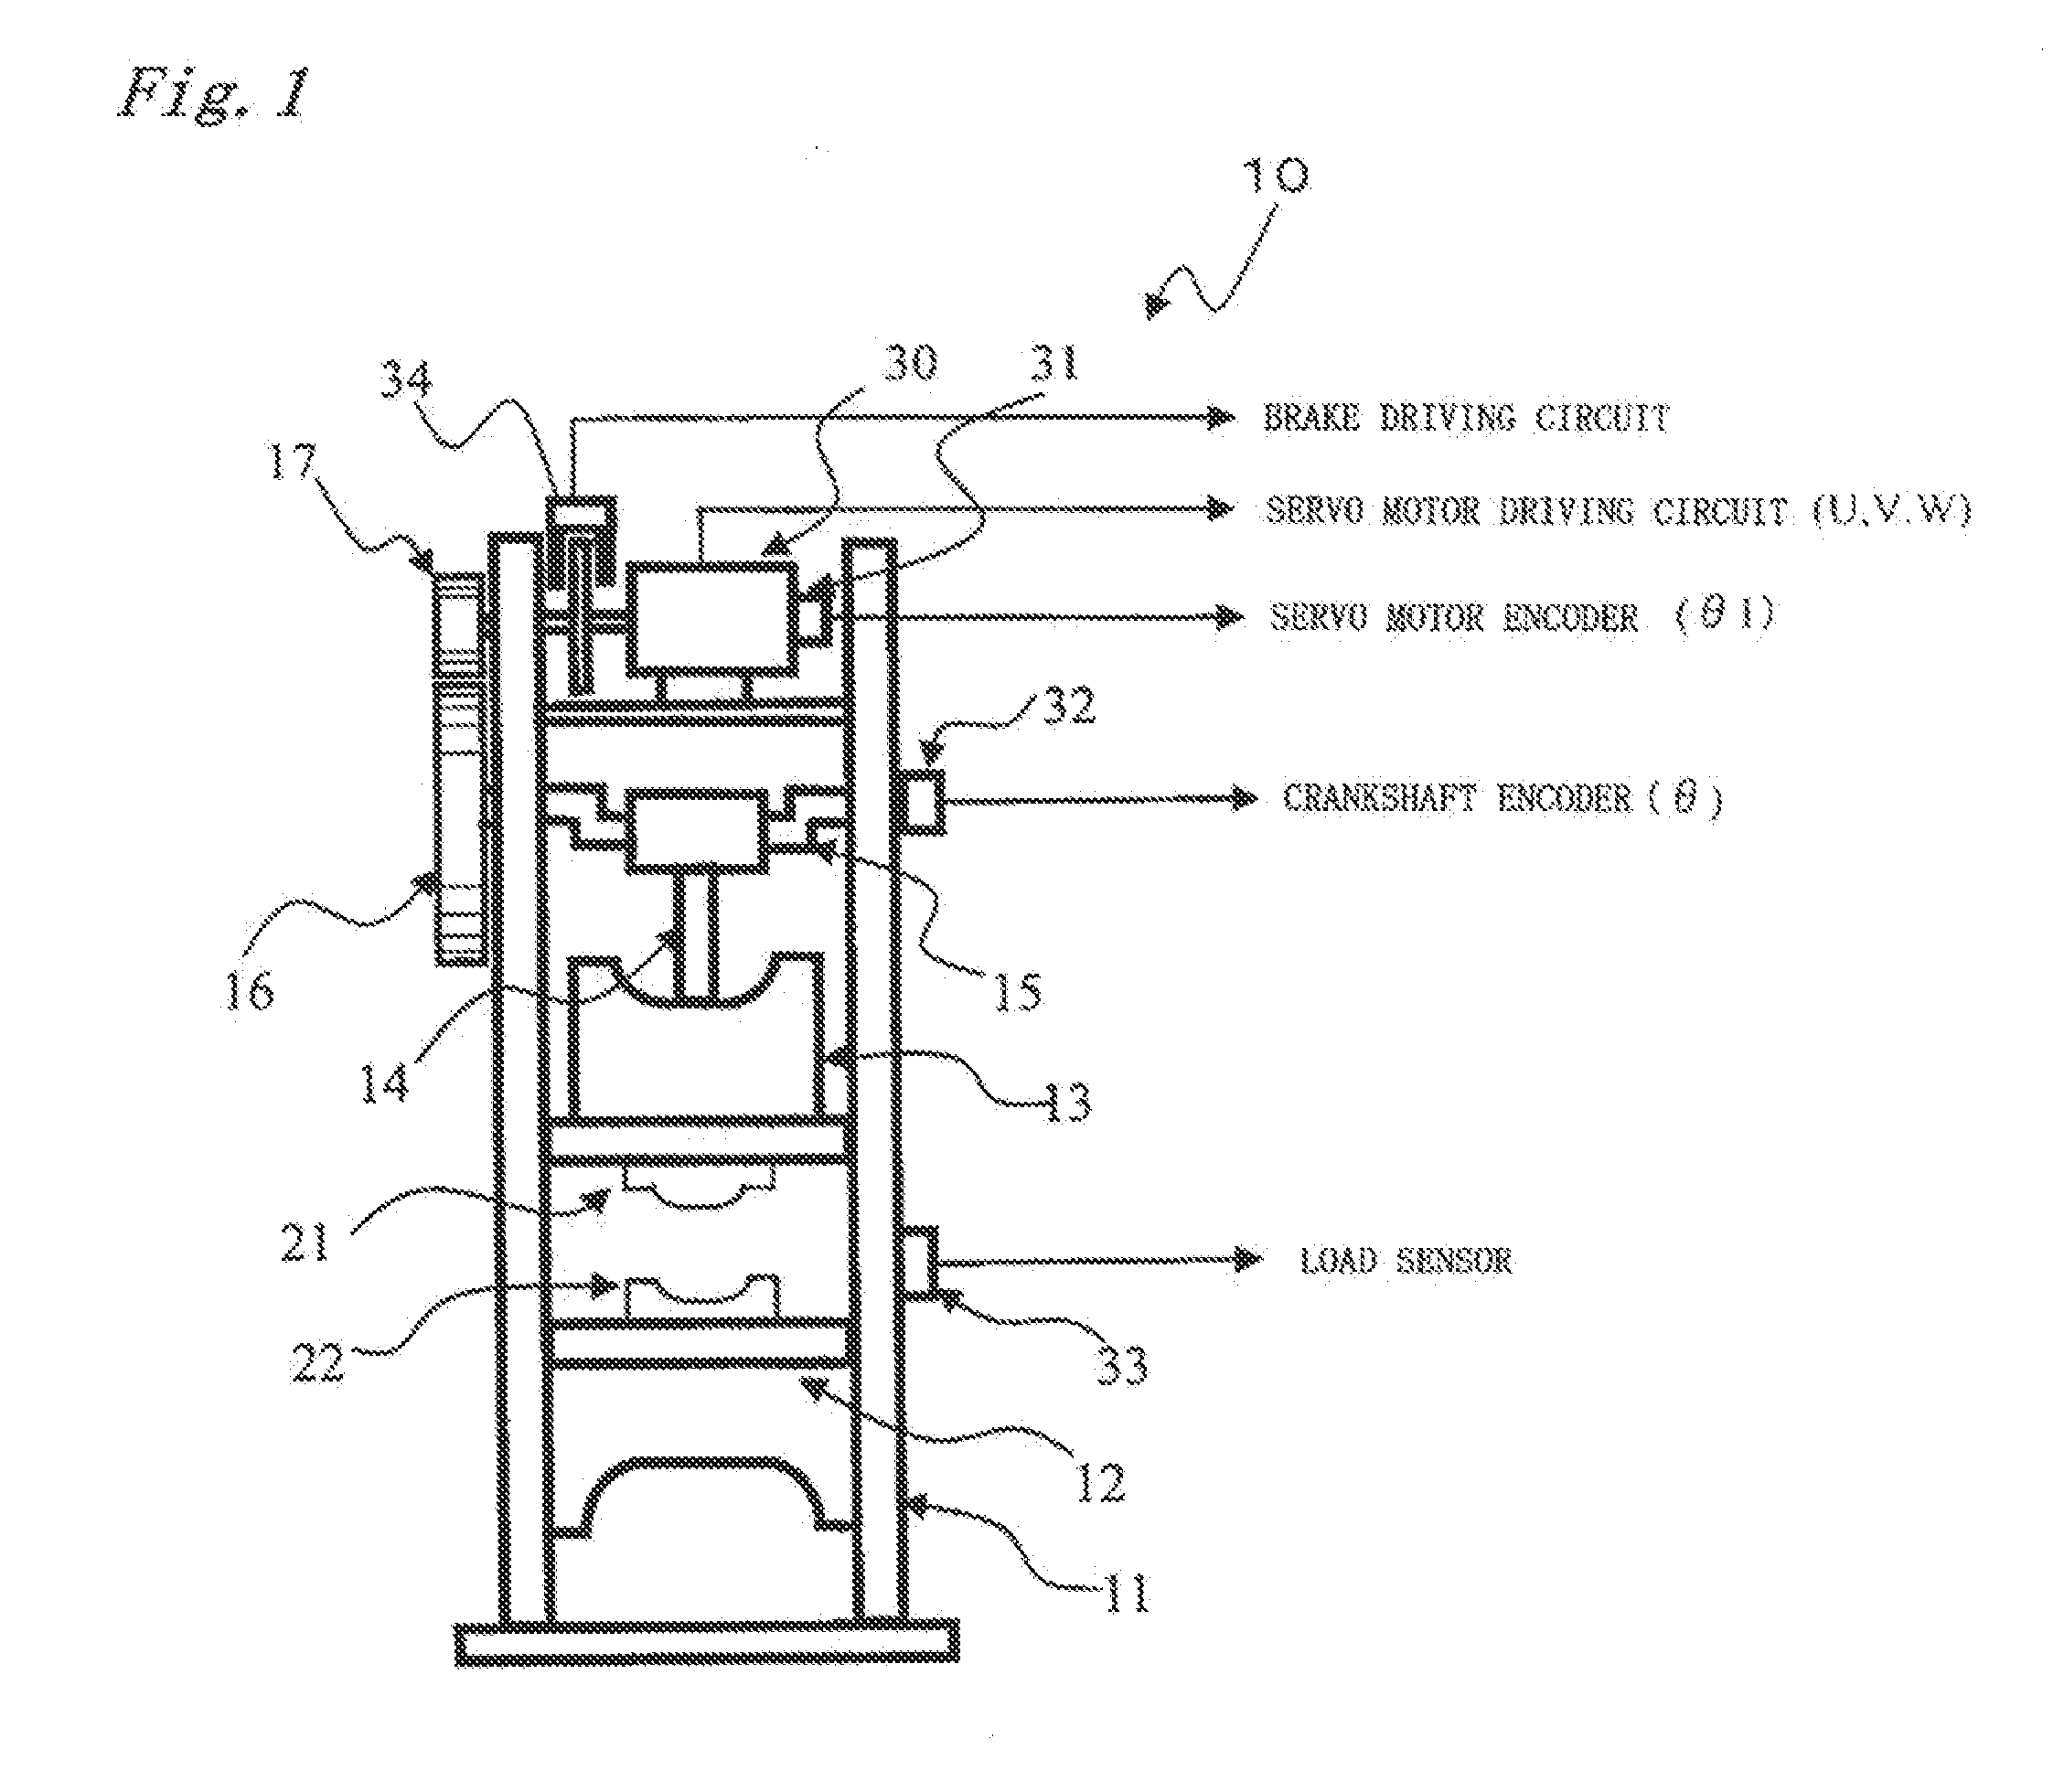 Method and apparatus for controlling electric servo press